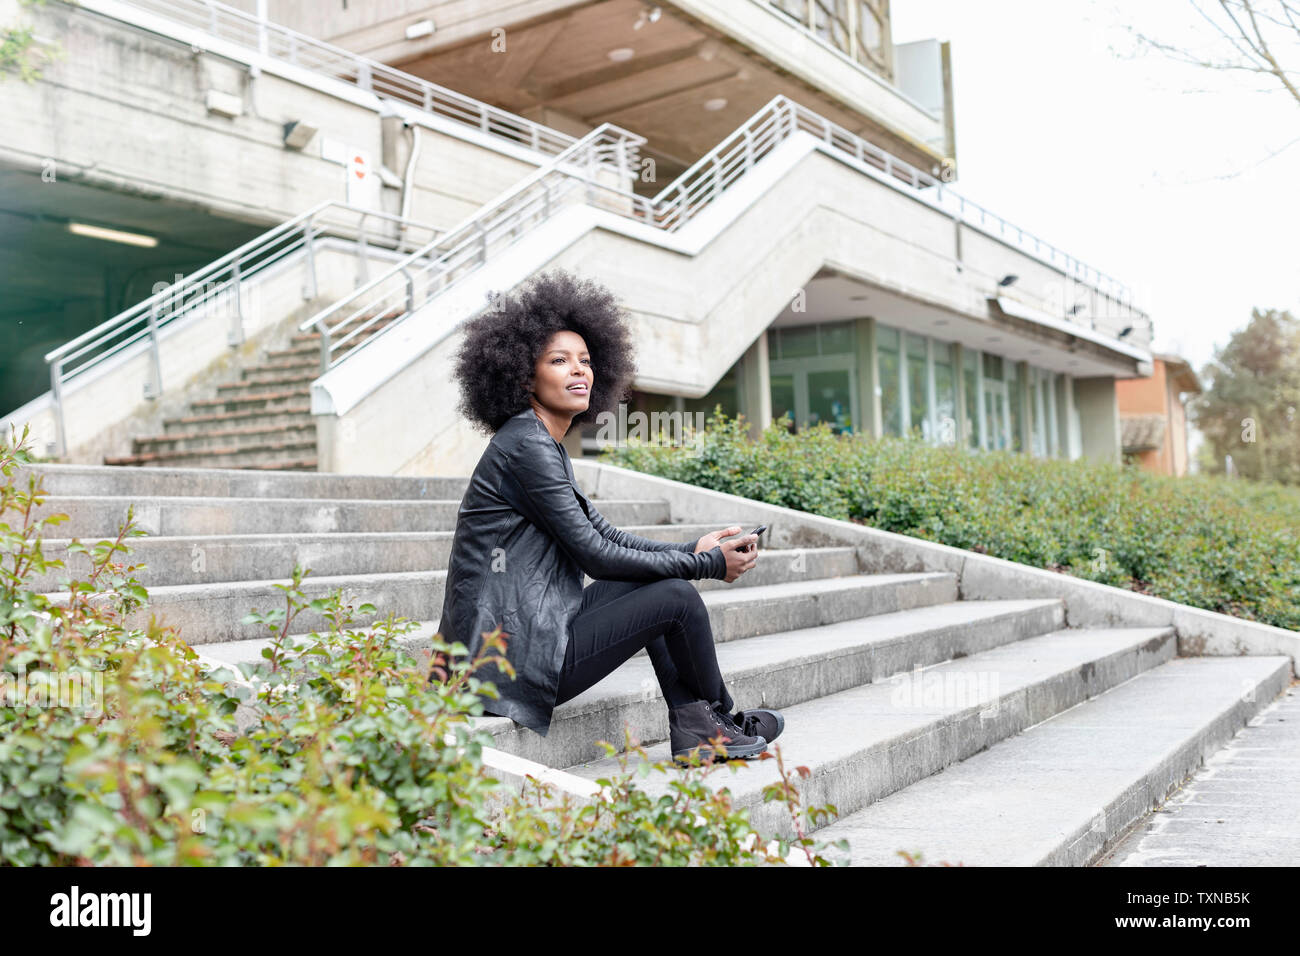 Young woman with afro hair sitting on city stairway looking away Stock Photo